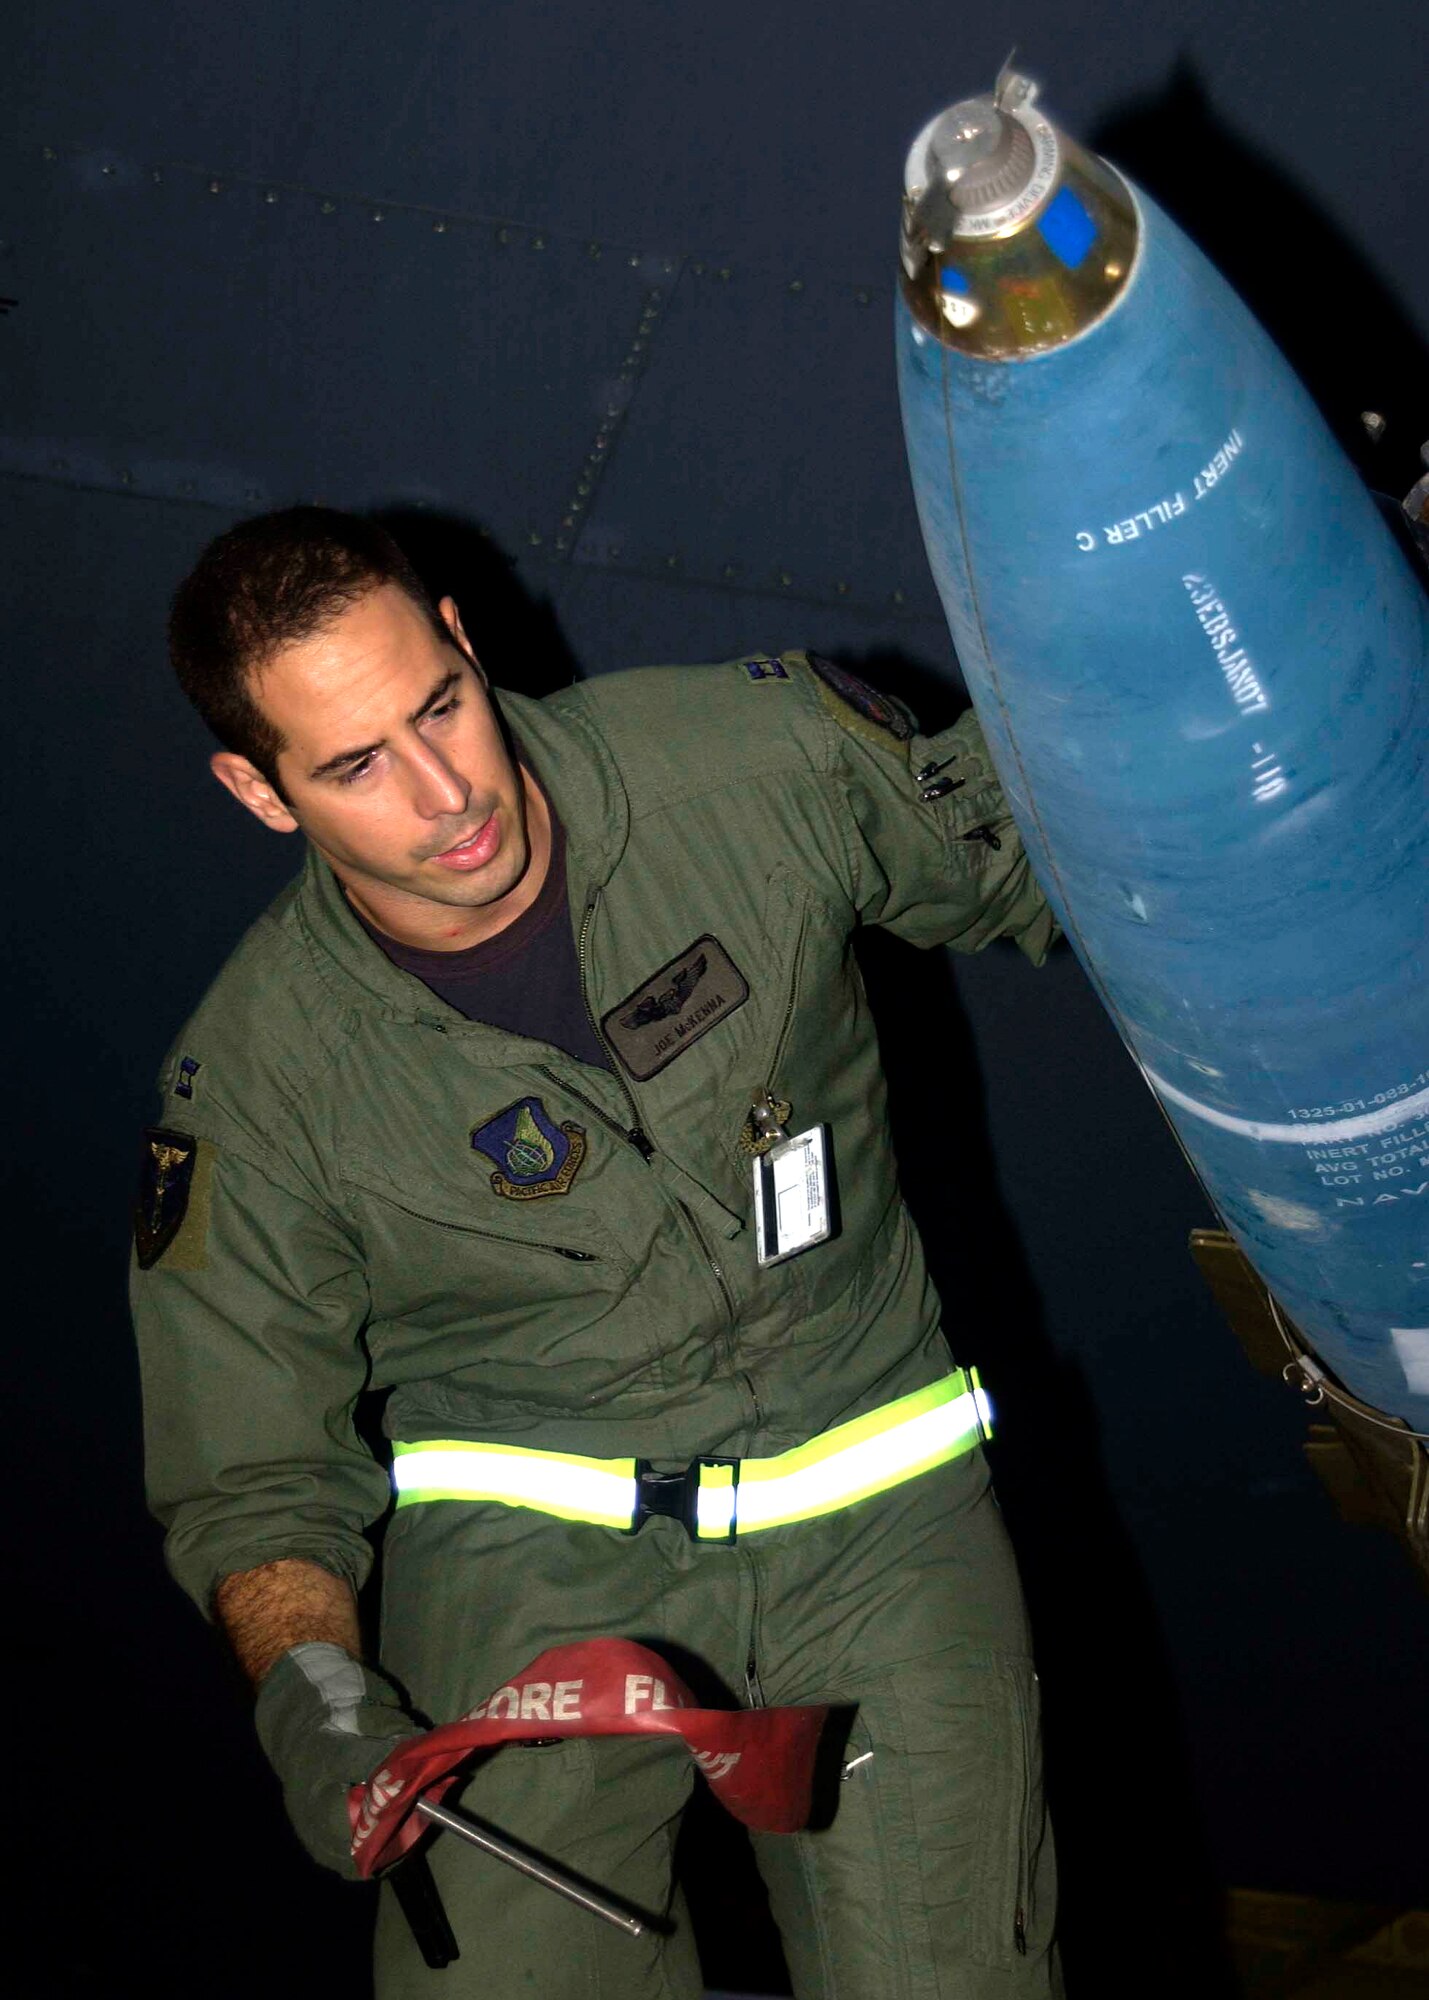 Capt. Joseph McKenna, a B-52 Stratofortress radar navigator assigned to the 23rd Expeditionary Bomb Squadron, checks a Mk-62 "Quickstrike" inert aerial mine prior to takeoff on a counter-sea exercise mission. The 23rd EBS completed a five-day counter-sea exercise Jan. 19, dropping 100 inert mines into the Pacific Ocean over the Marianas Trench. (U.S. Air Force Photo/Senior Master Sgt. Don Perrien)